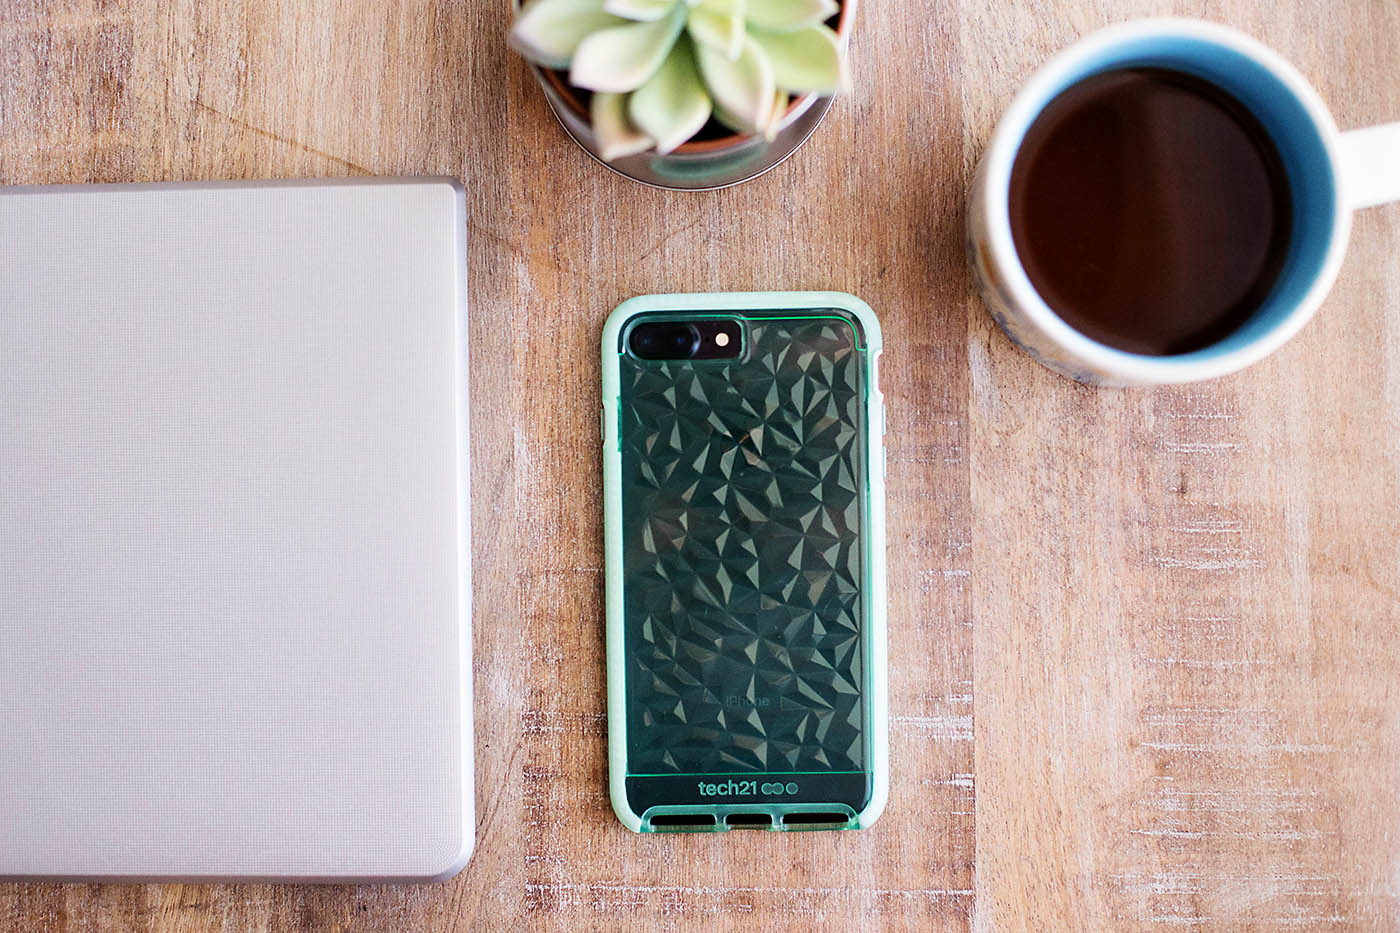 Choosing a phone case that's perfect for your adventure